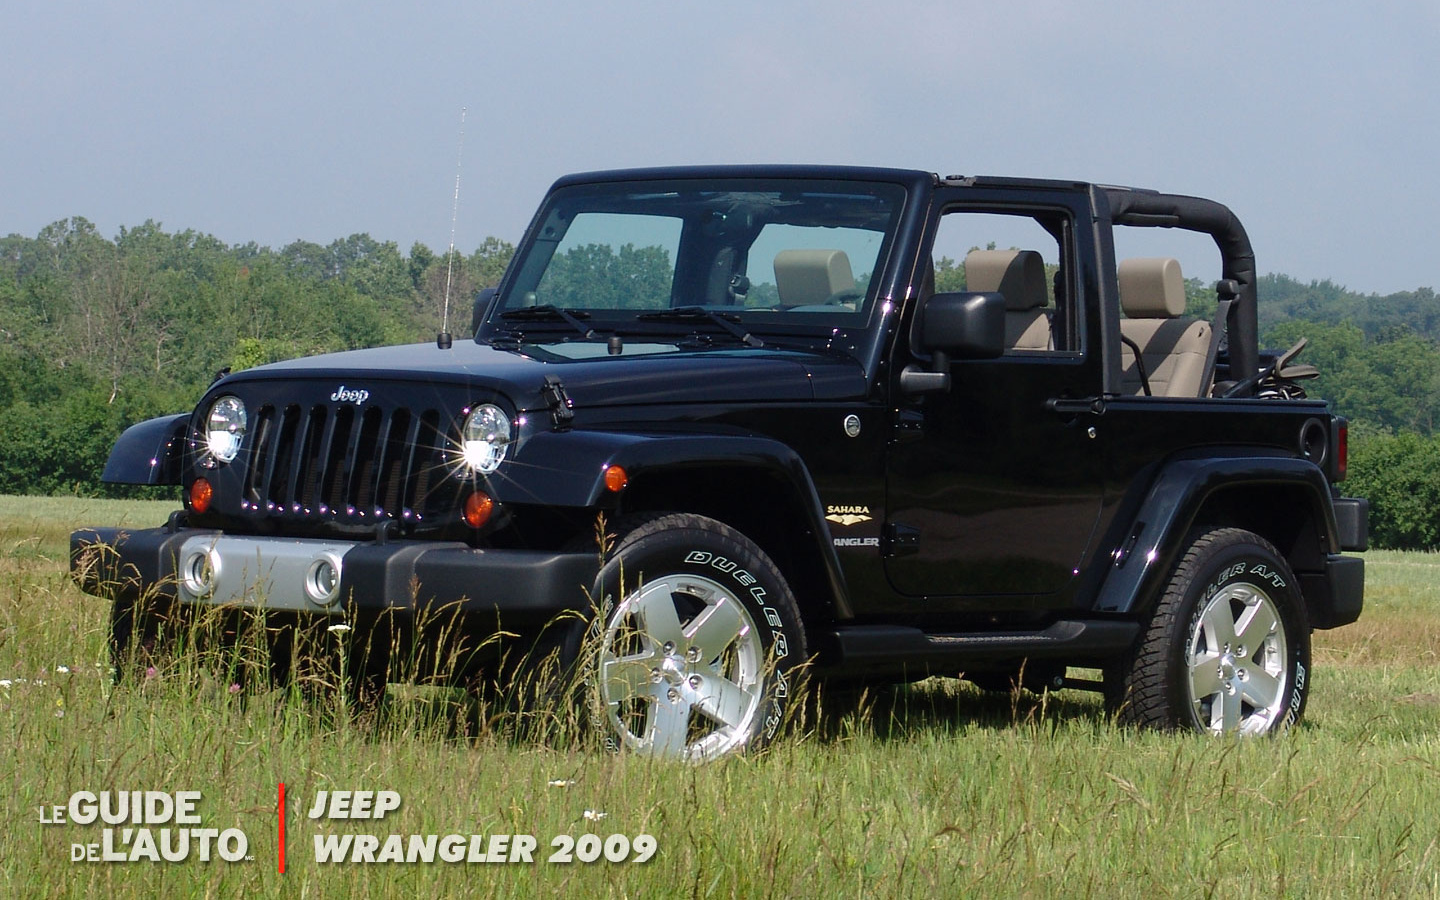 Wallpapers   2008 Jeep Wrangler   The Car Guide